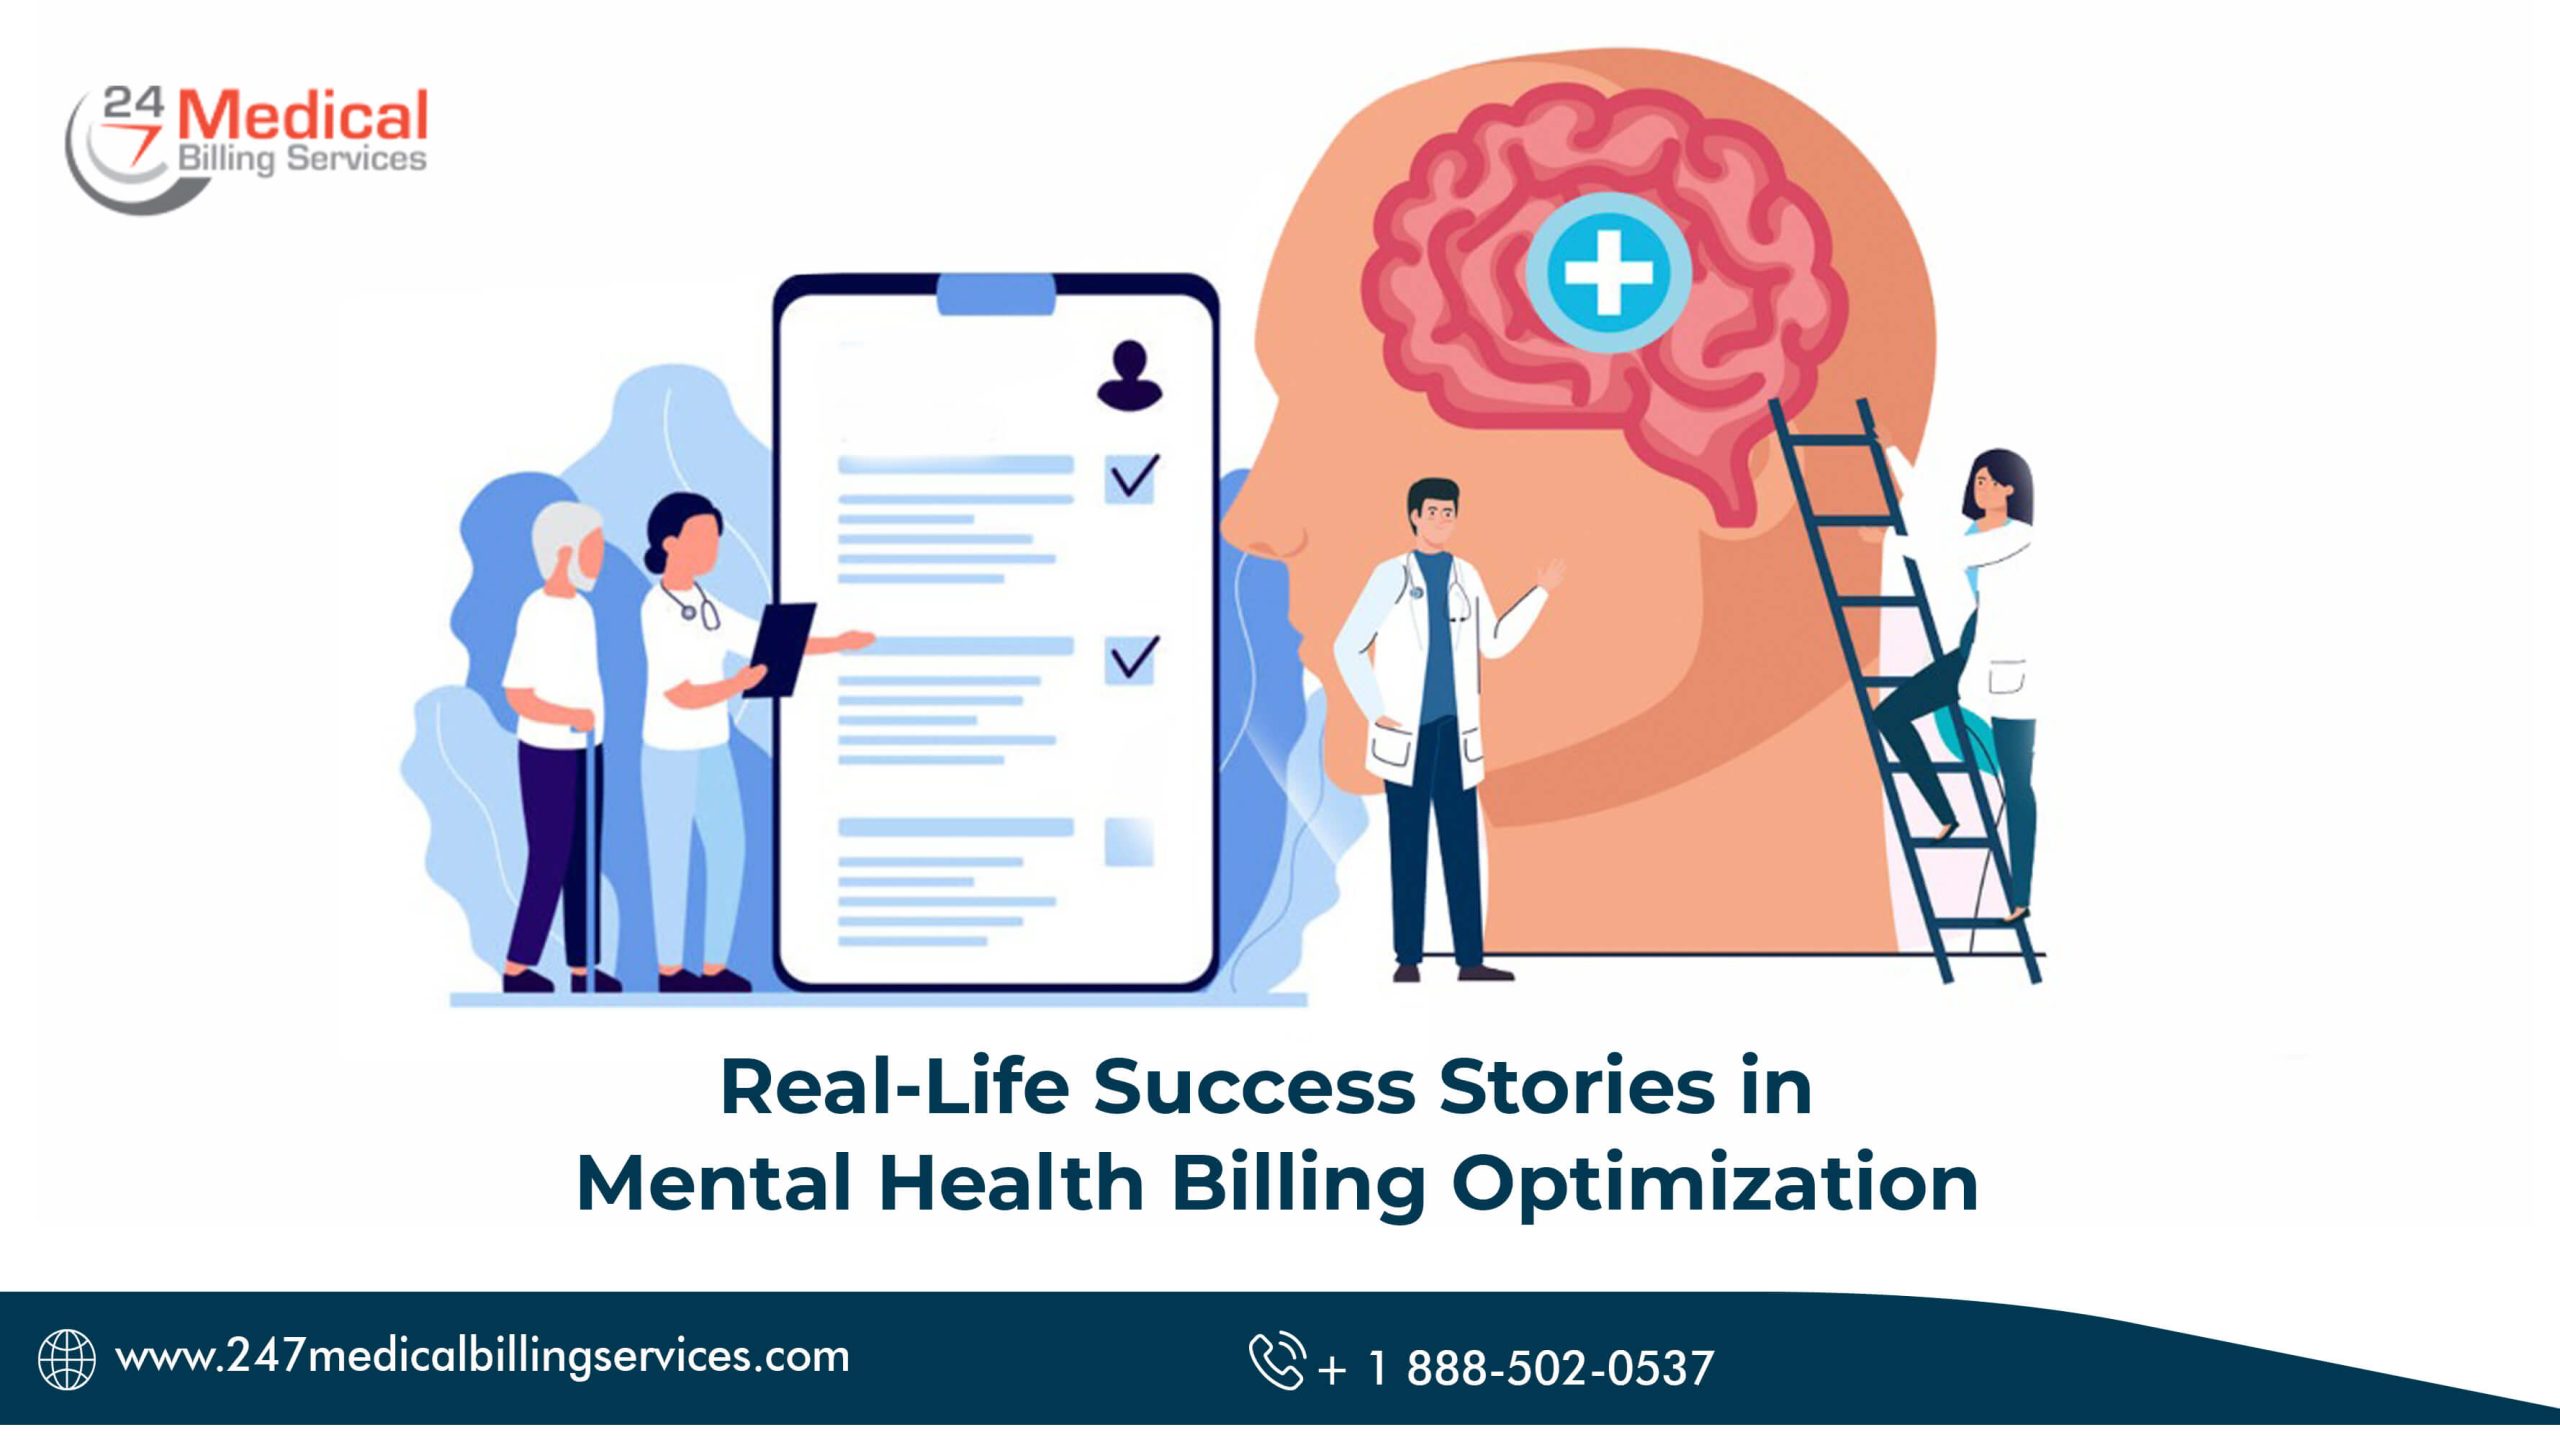  Case Study: Real-Life Success Stories in Mental Health Billing Optimization